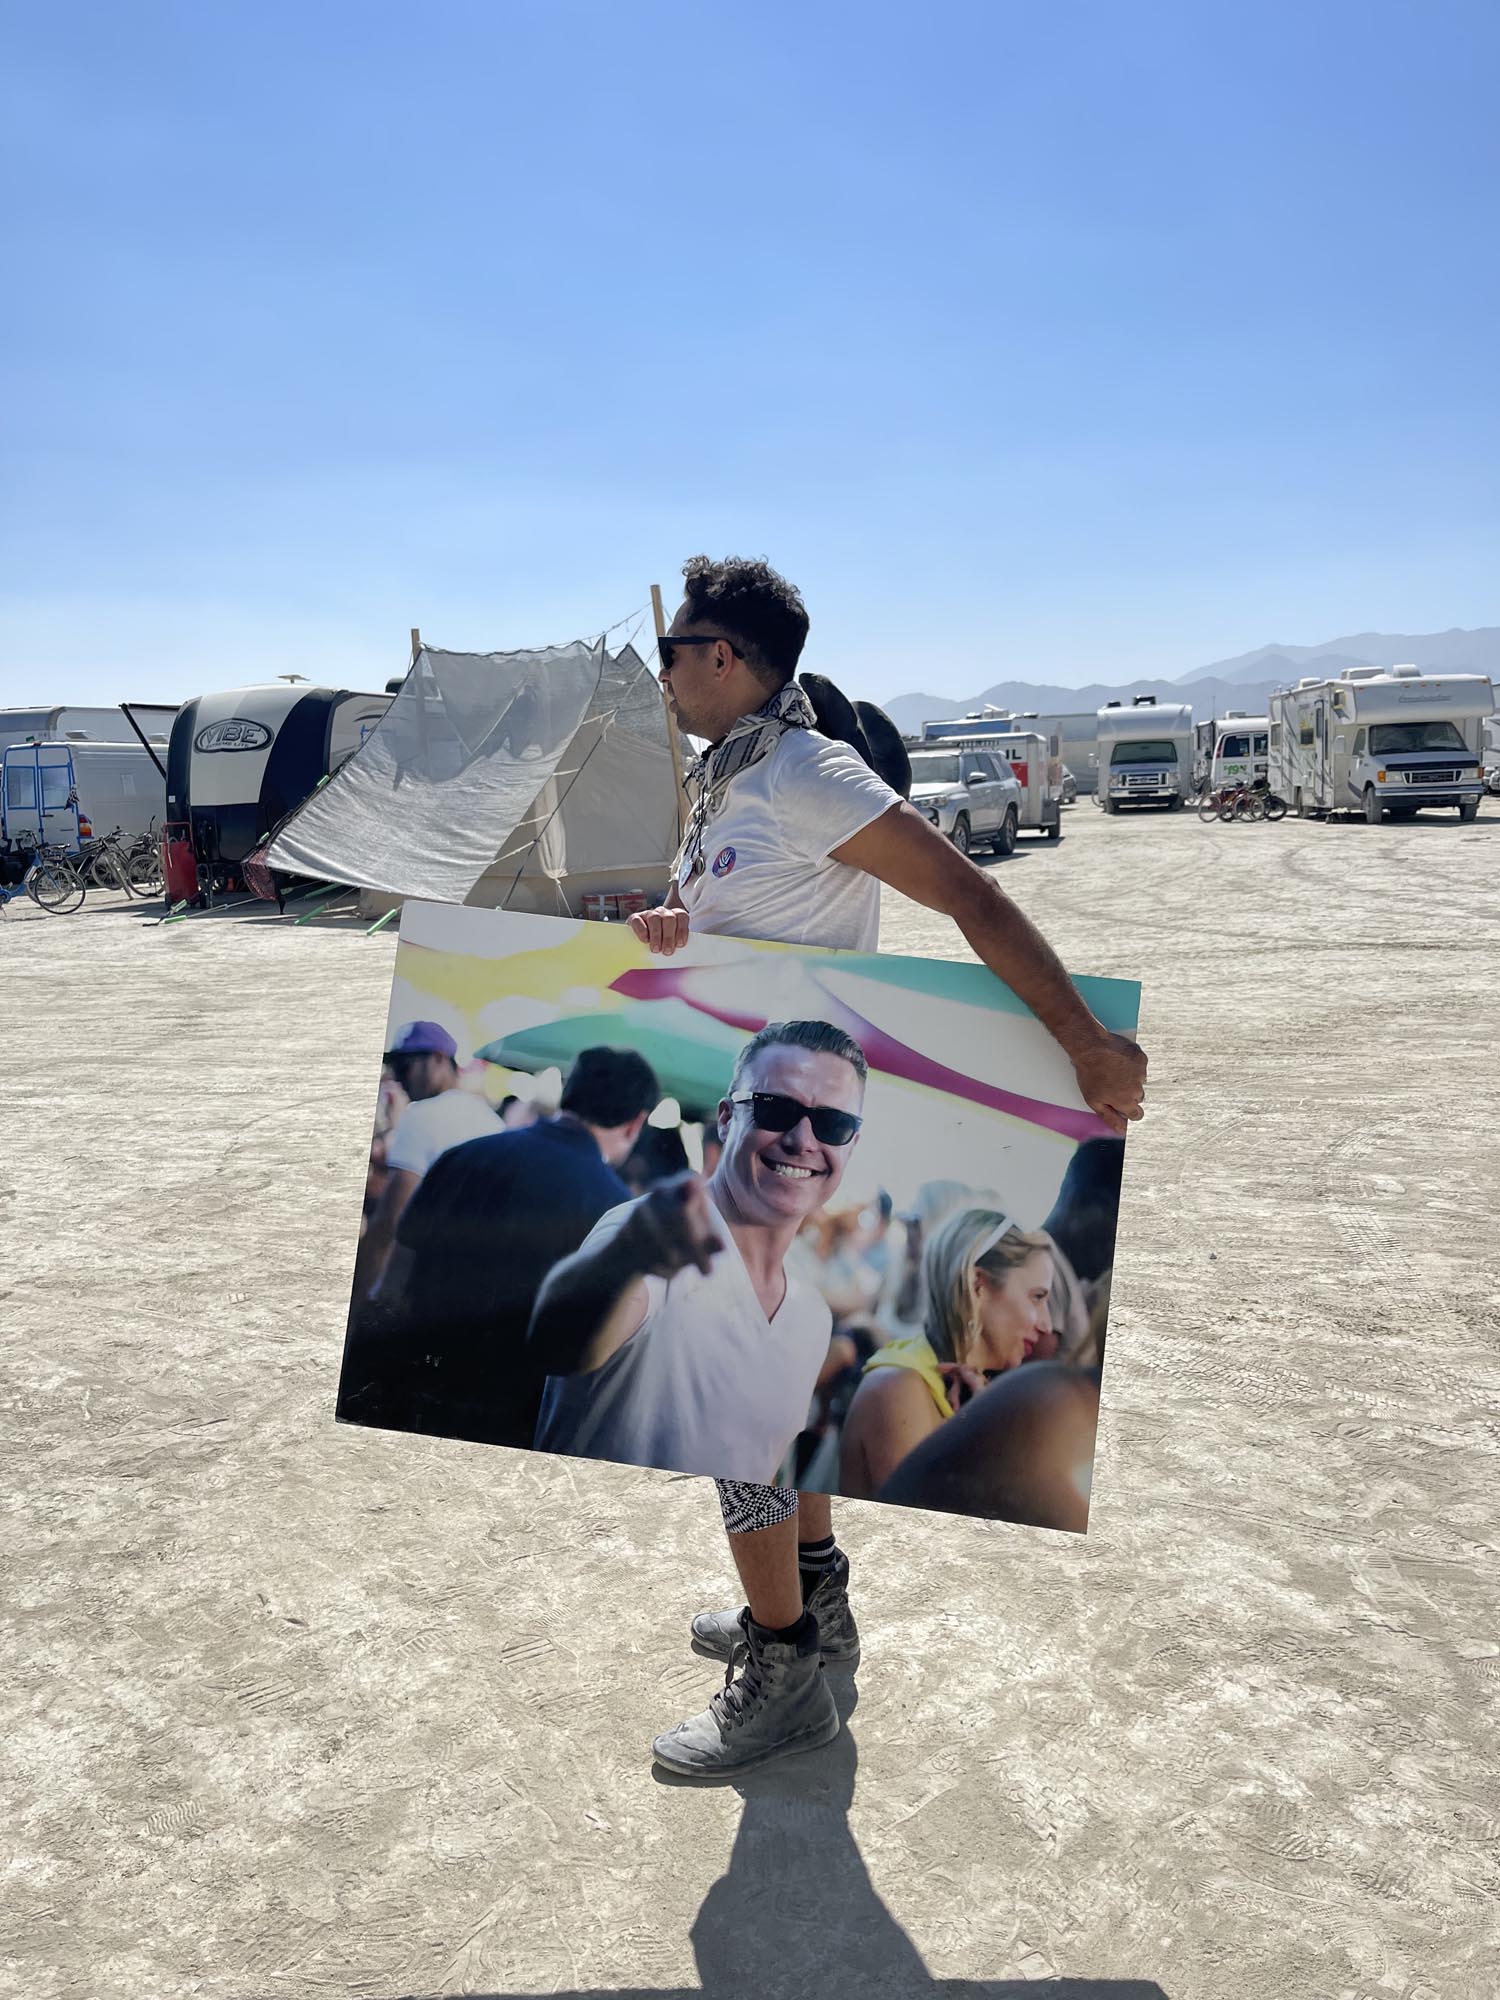 There were multiple memor­ials for Lee, who attended Burning Man regularly - one in Miami, where he lived his final year, and one in San Francisco.